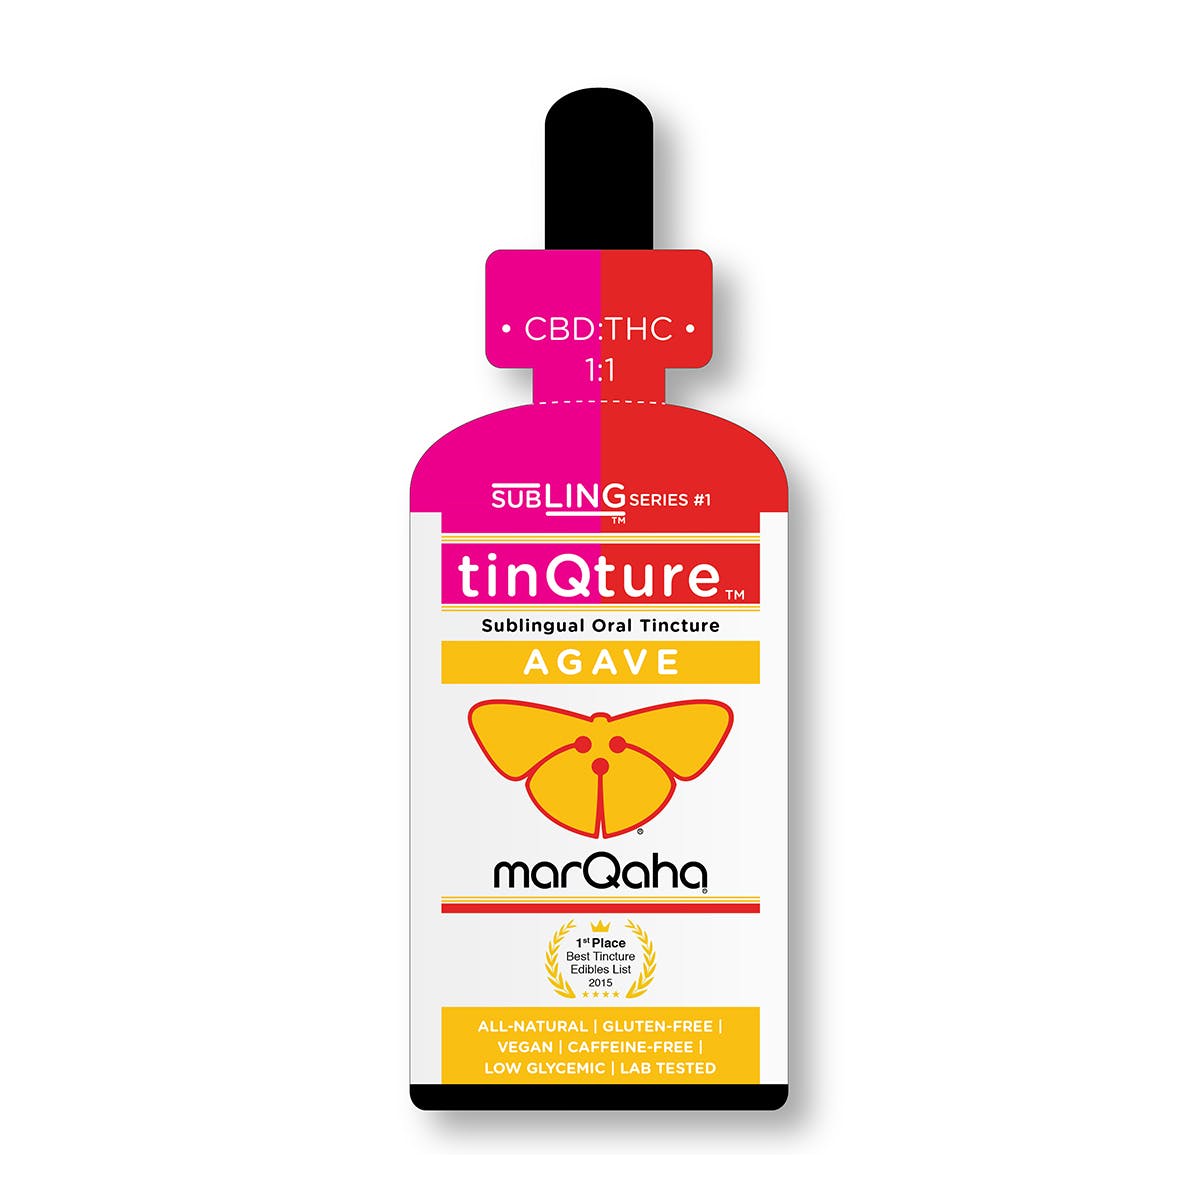 tincture-marqaha-agave-tinqture-11-med